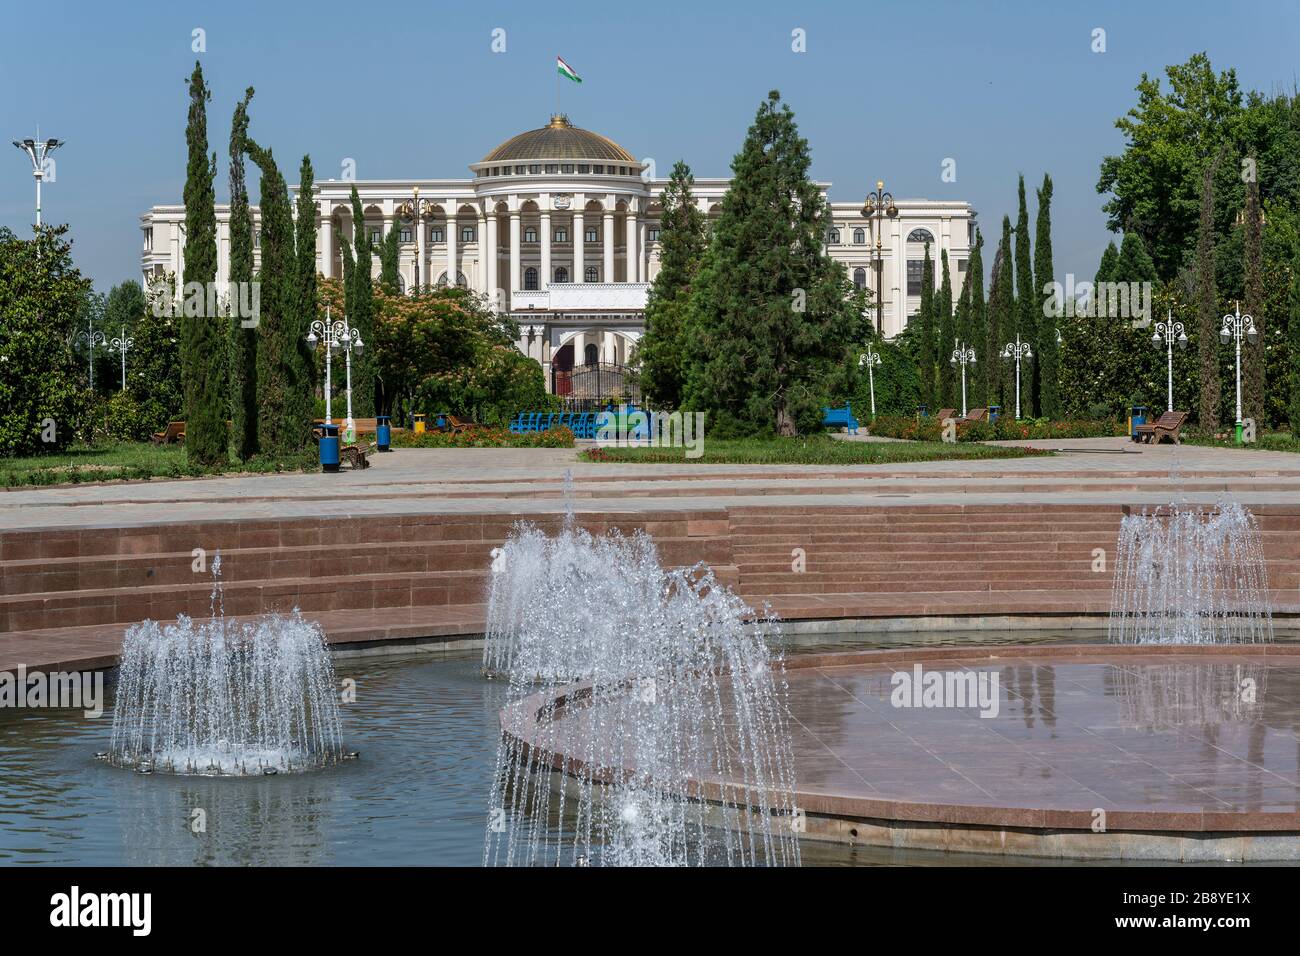 Dushanbe, Tazjikistan - June 14, 2019: Rudaki Park with trees, fountain and great building in the capital of Dushanbe. Stock Photo